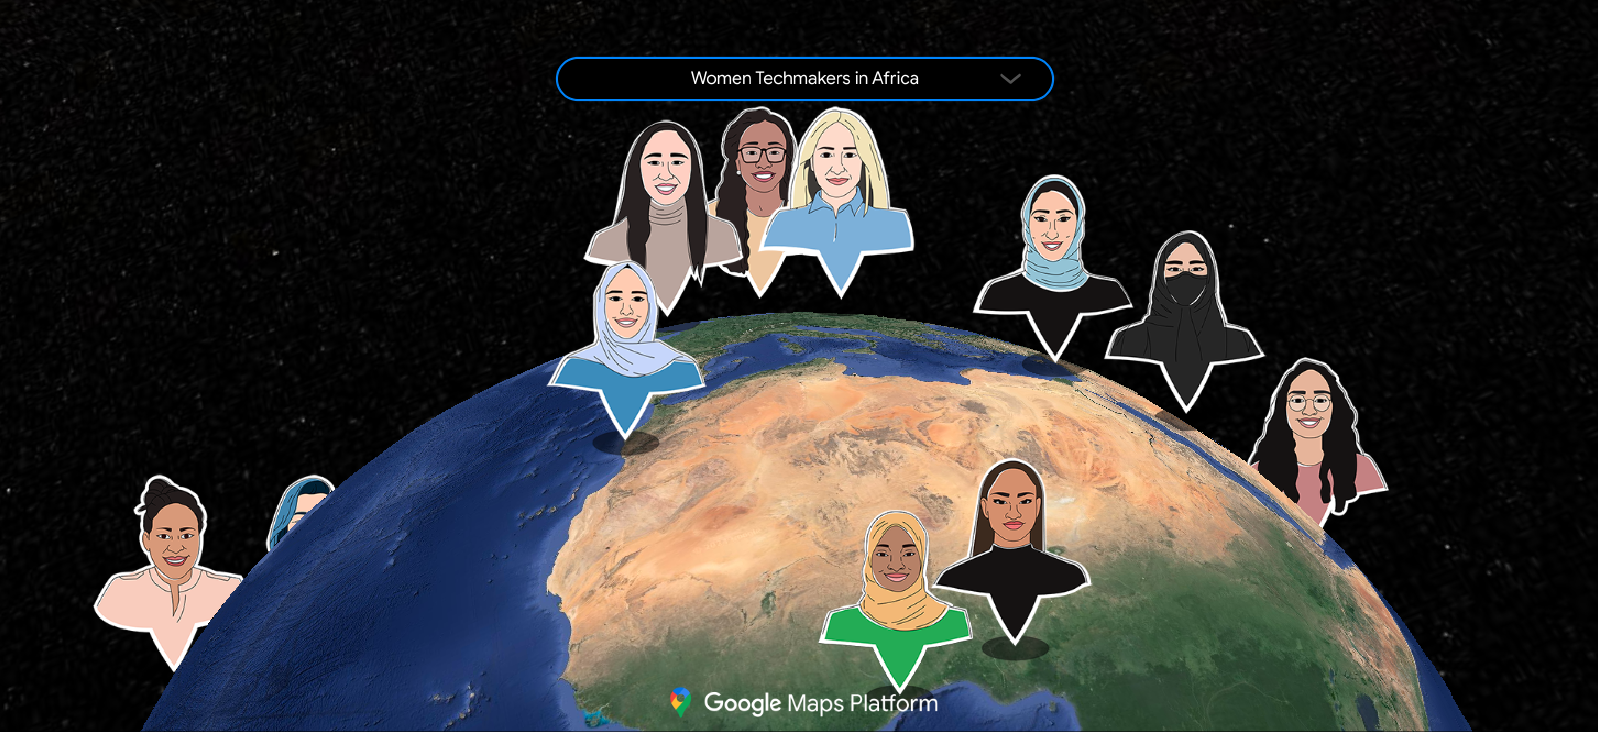 A map showcasing the global network of Women Techmakers Ambassadors, illustrated as a diverse group of people positioned on a map according to their respective countries.